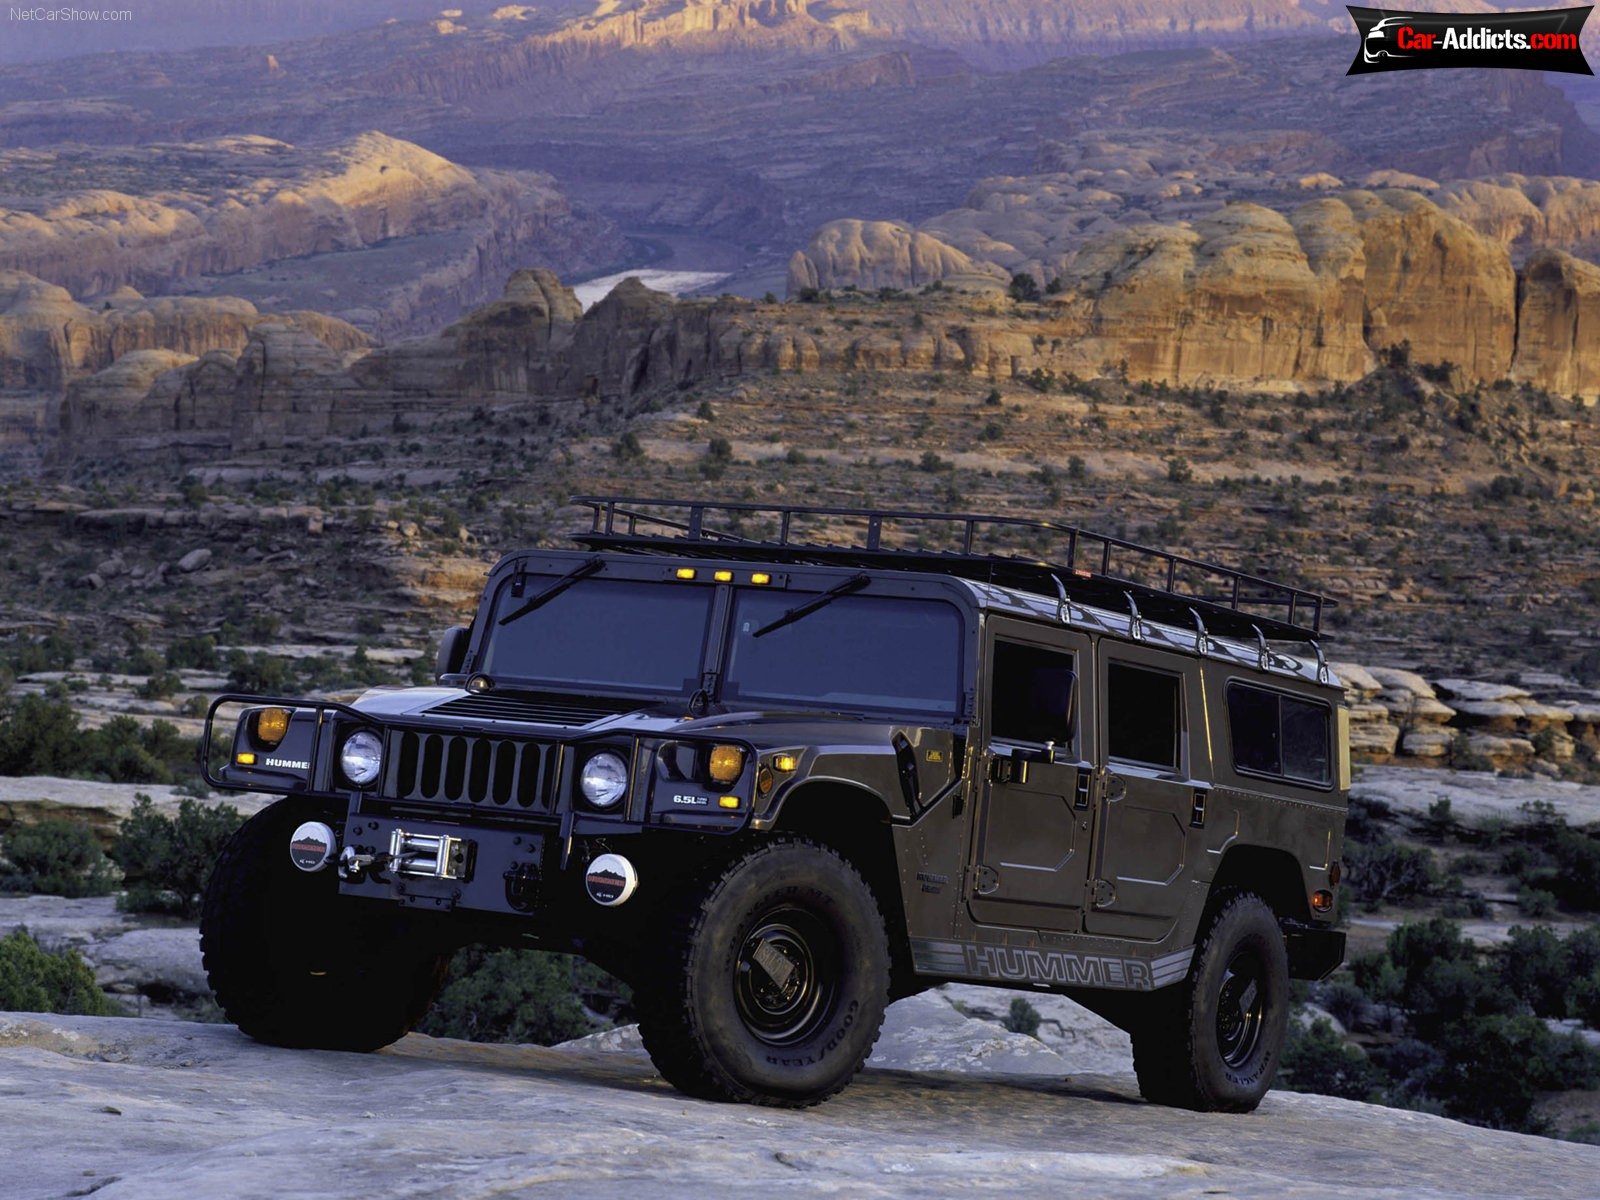 Best Car And Girls Hummer Wallpapers Pictures